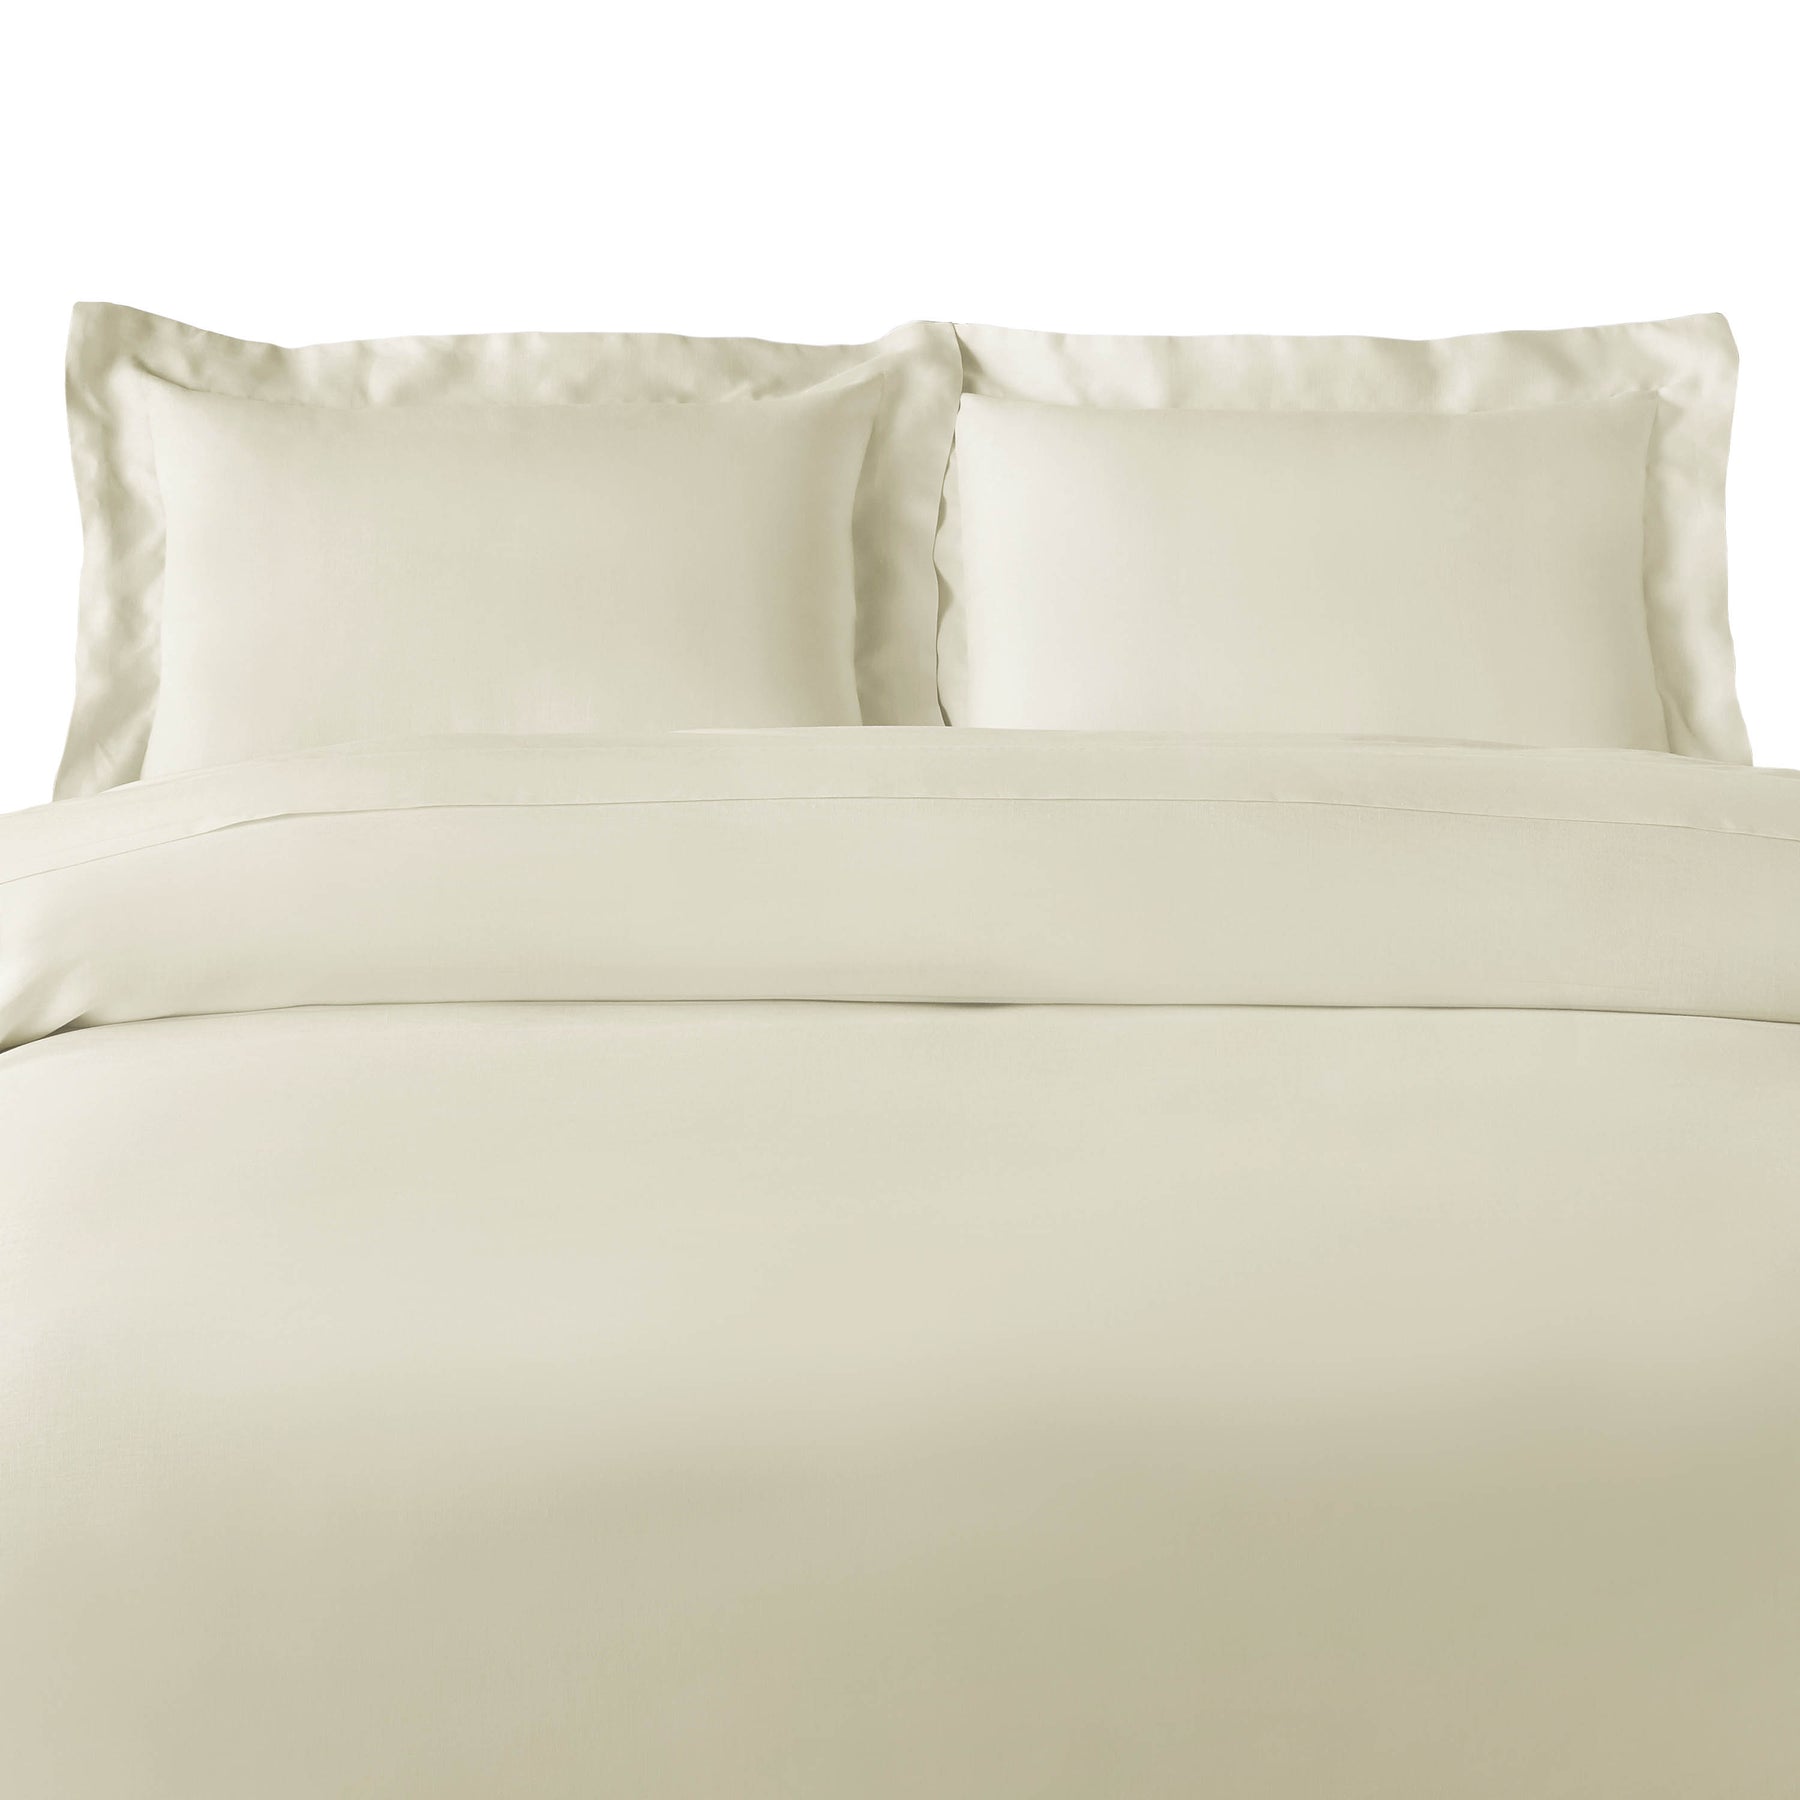 100% Rayon From Bamboo 300 Thread Count Solid Duvet Cover Set - Ivory